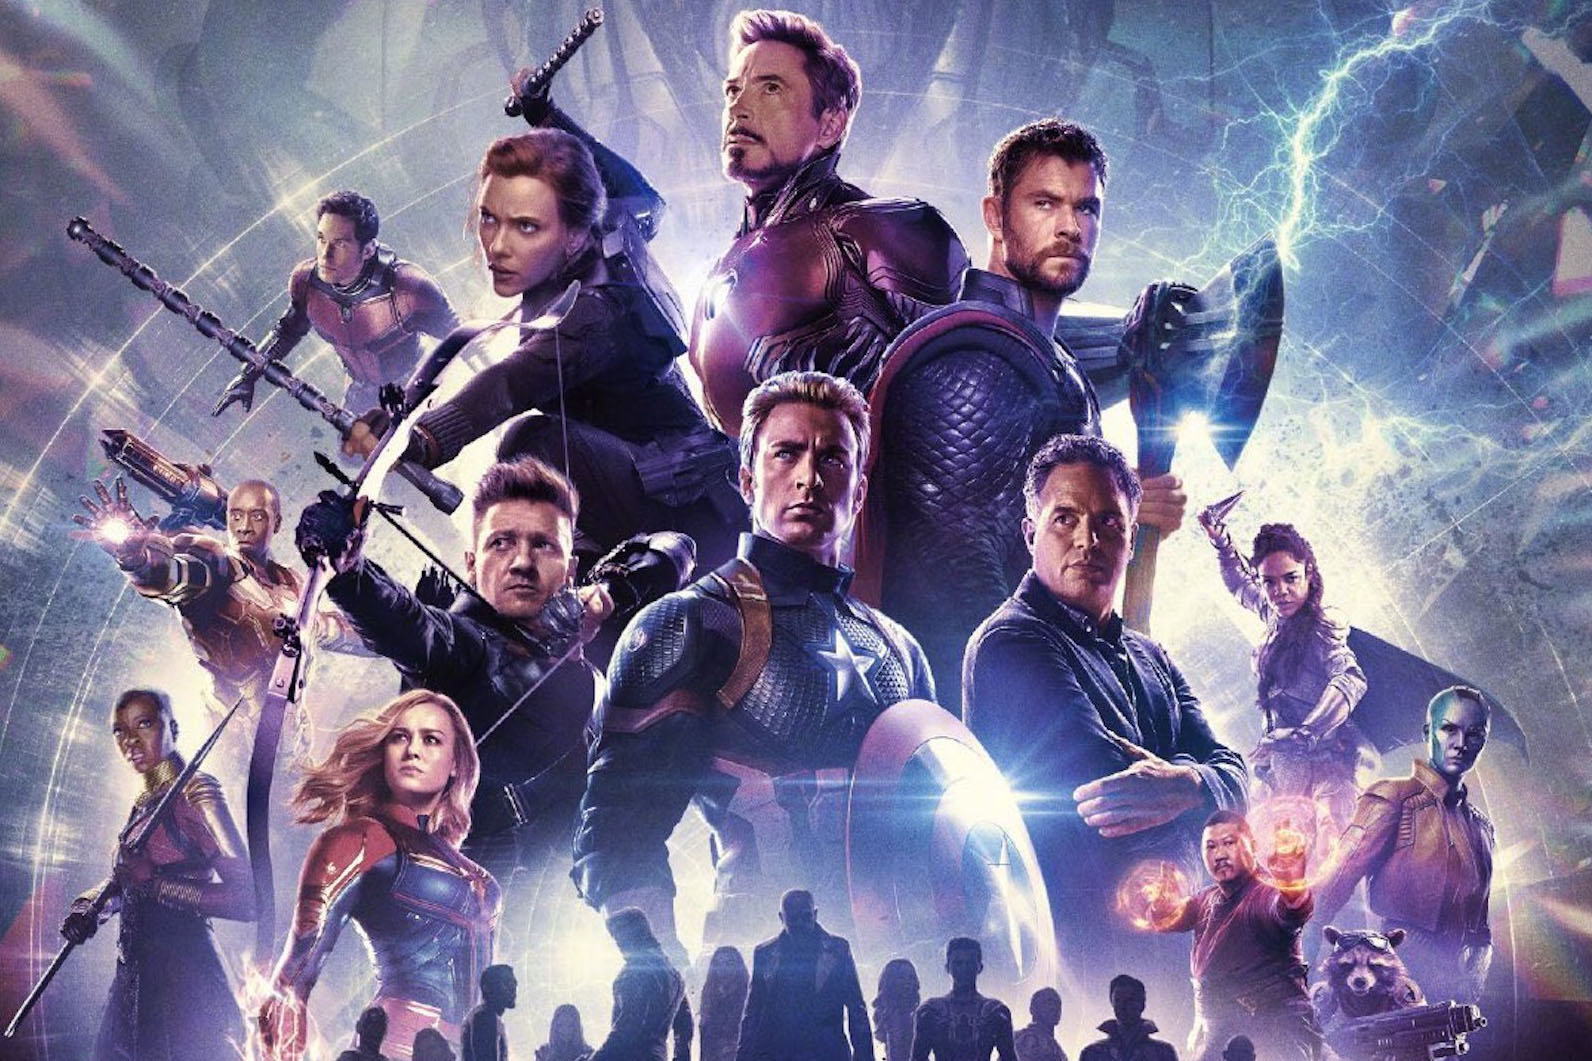 Avenger Endgame is in 5th spot in IMDb Top 250 movies with 160k